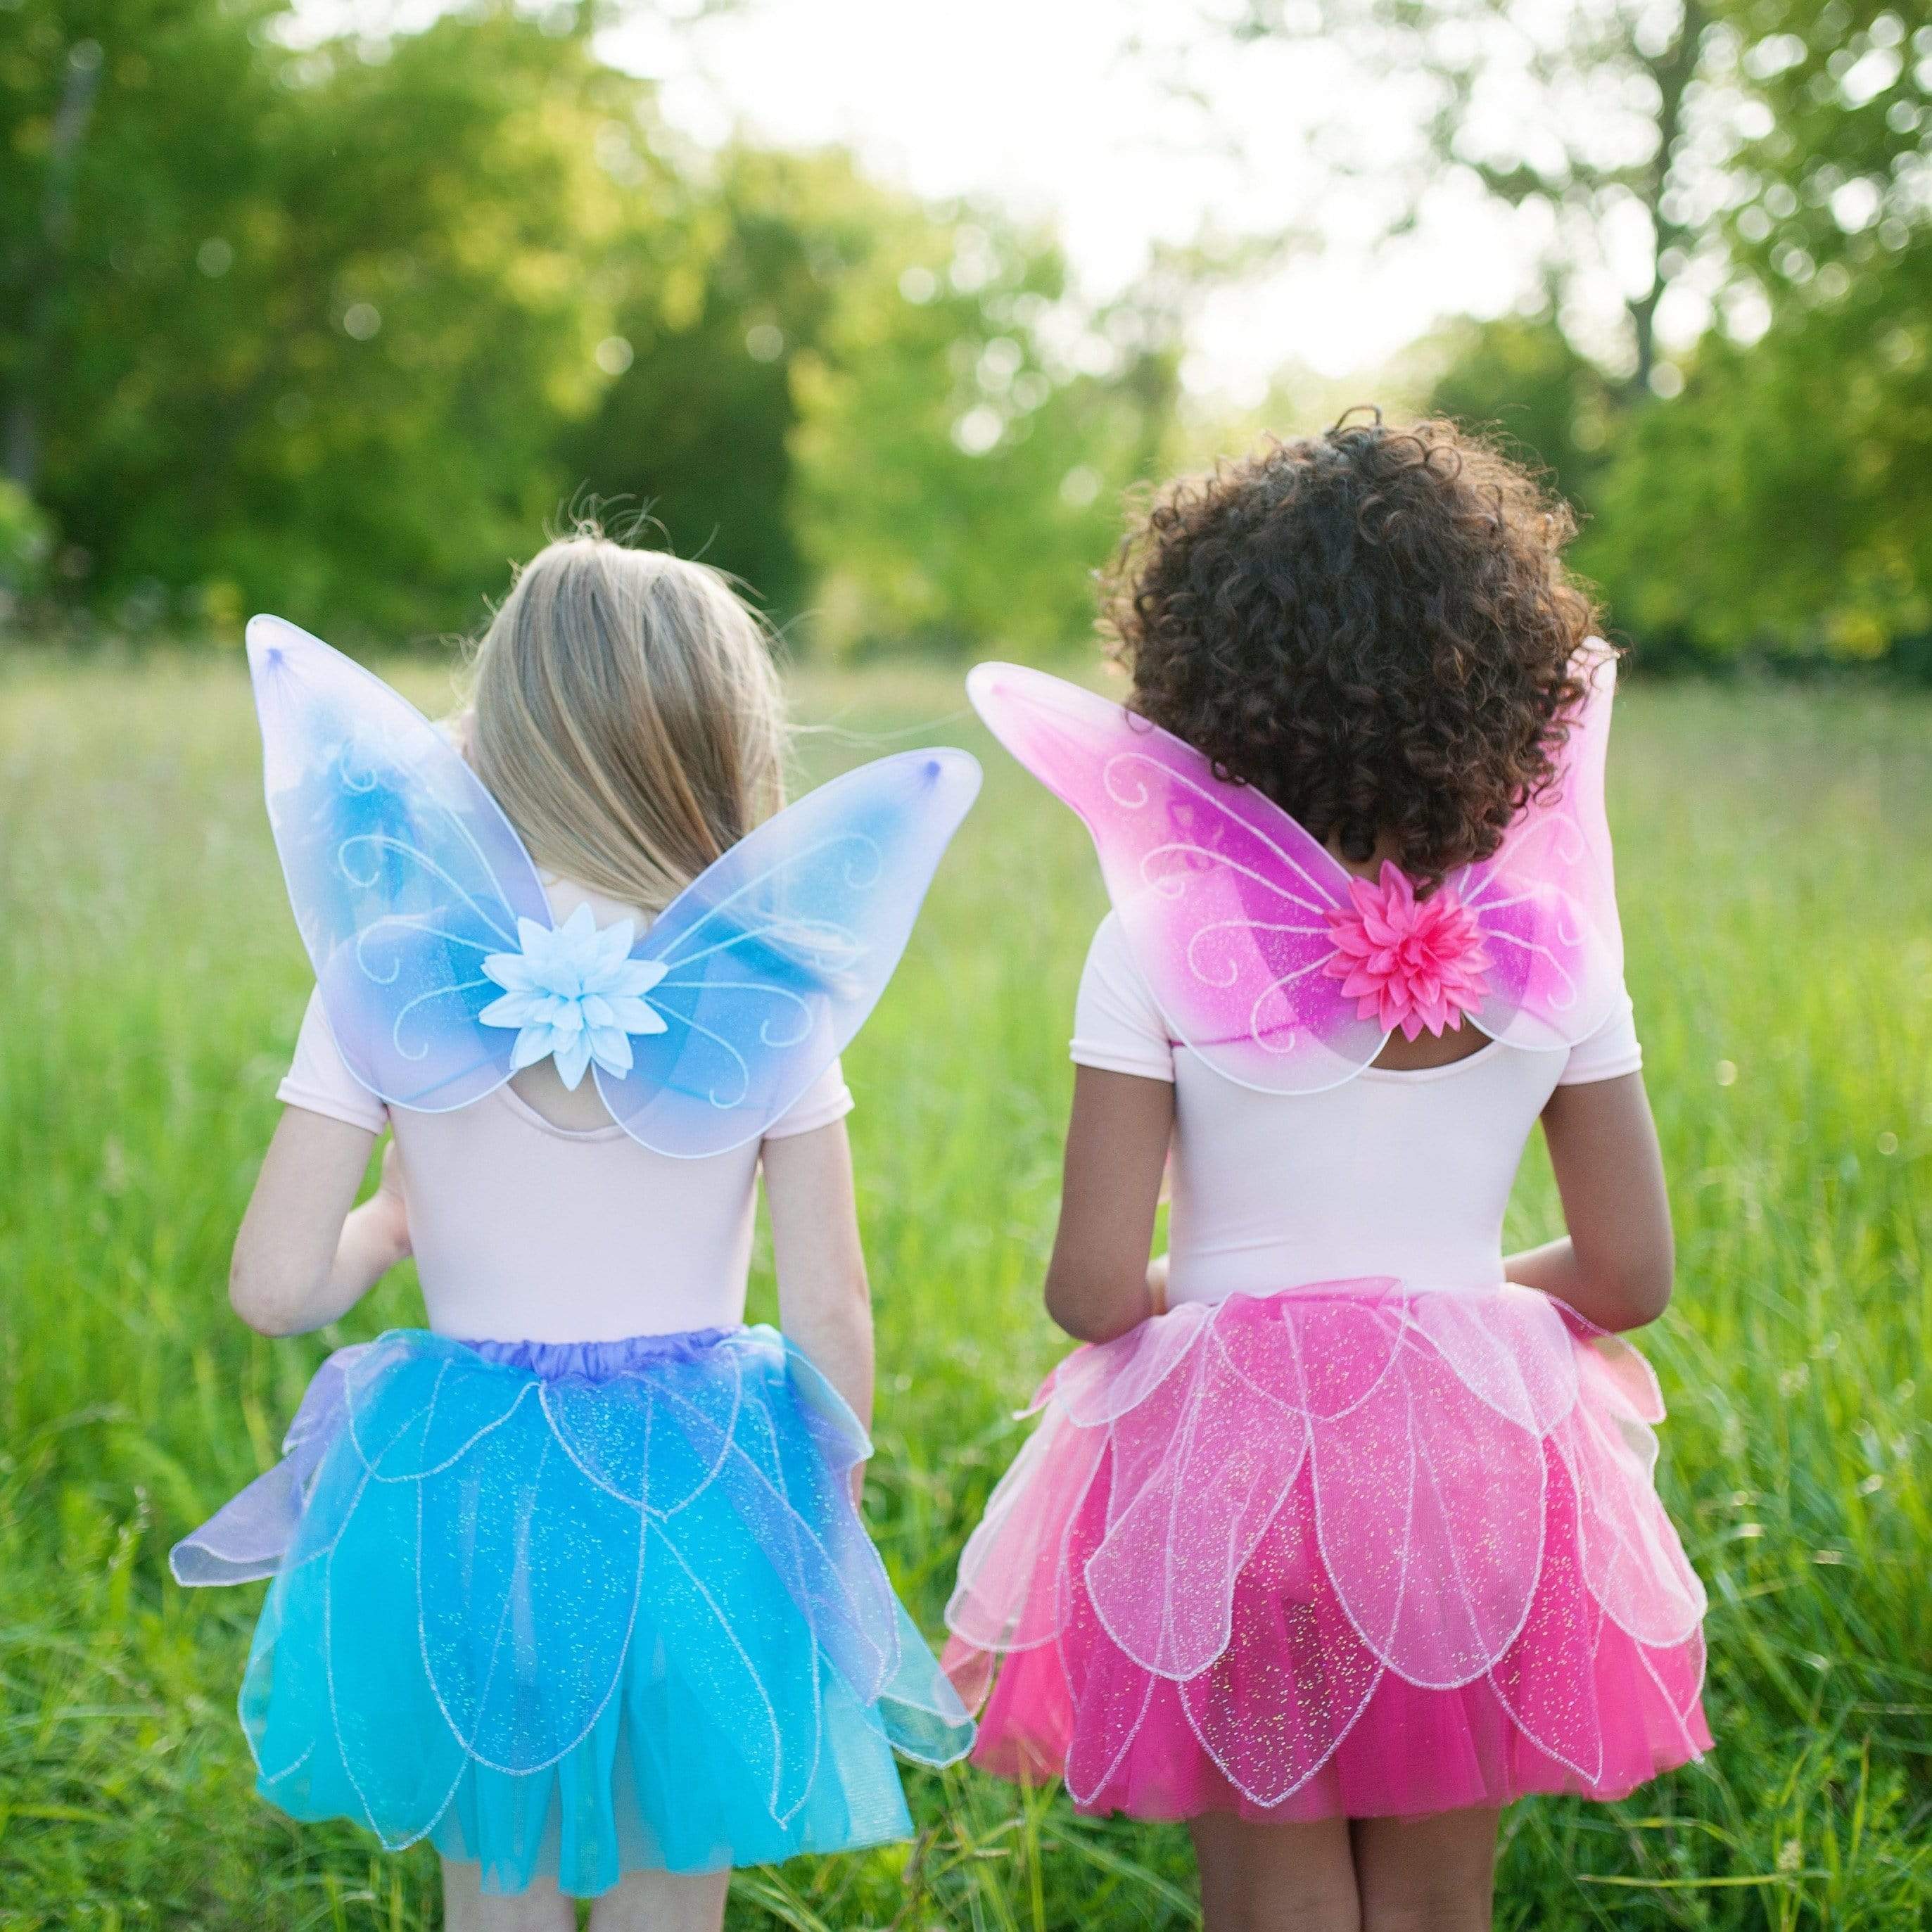 Great Pretenders Fancy Flutter Skirt with Fairy Wings & Wand Play Costume Set – Pink